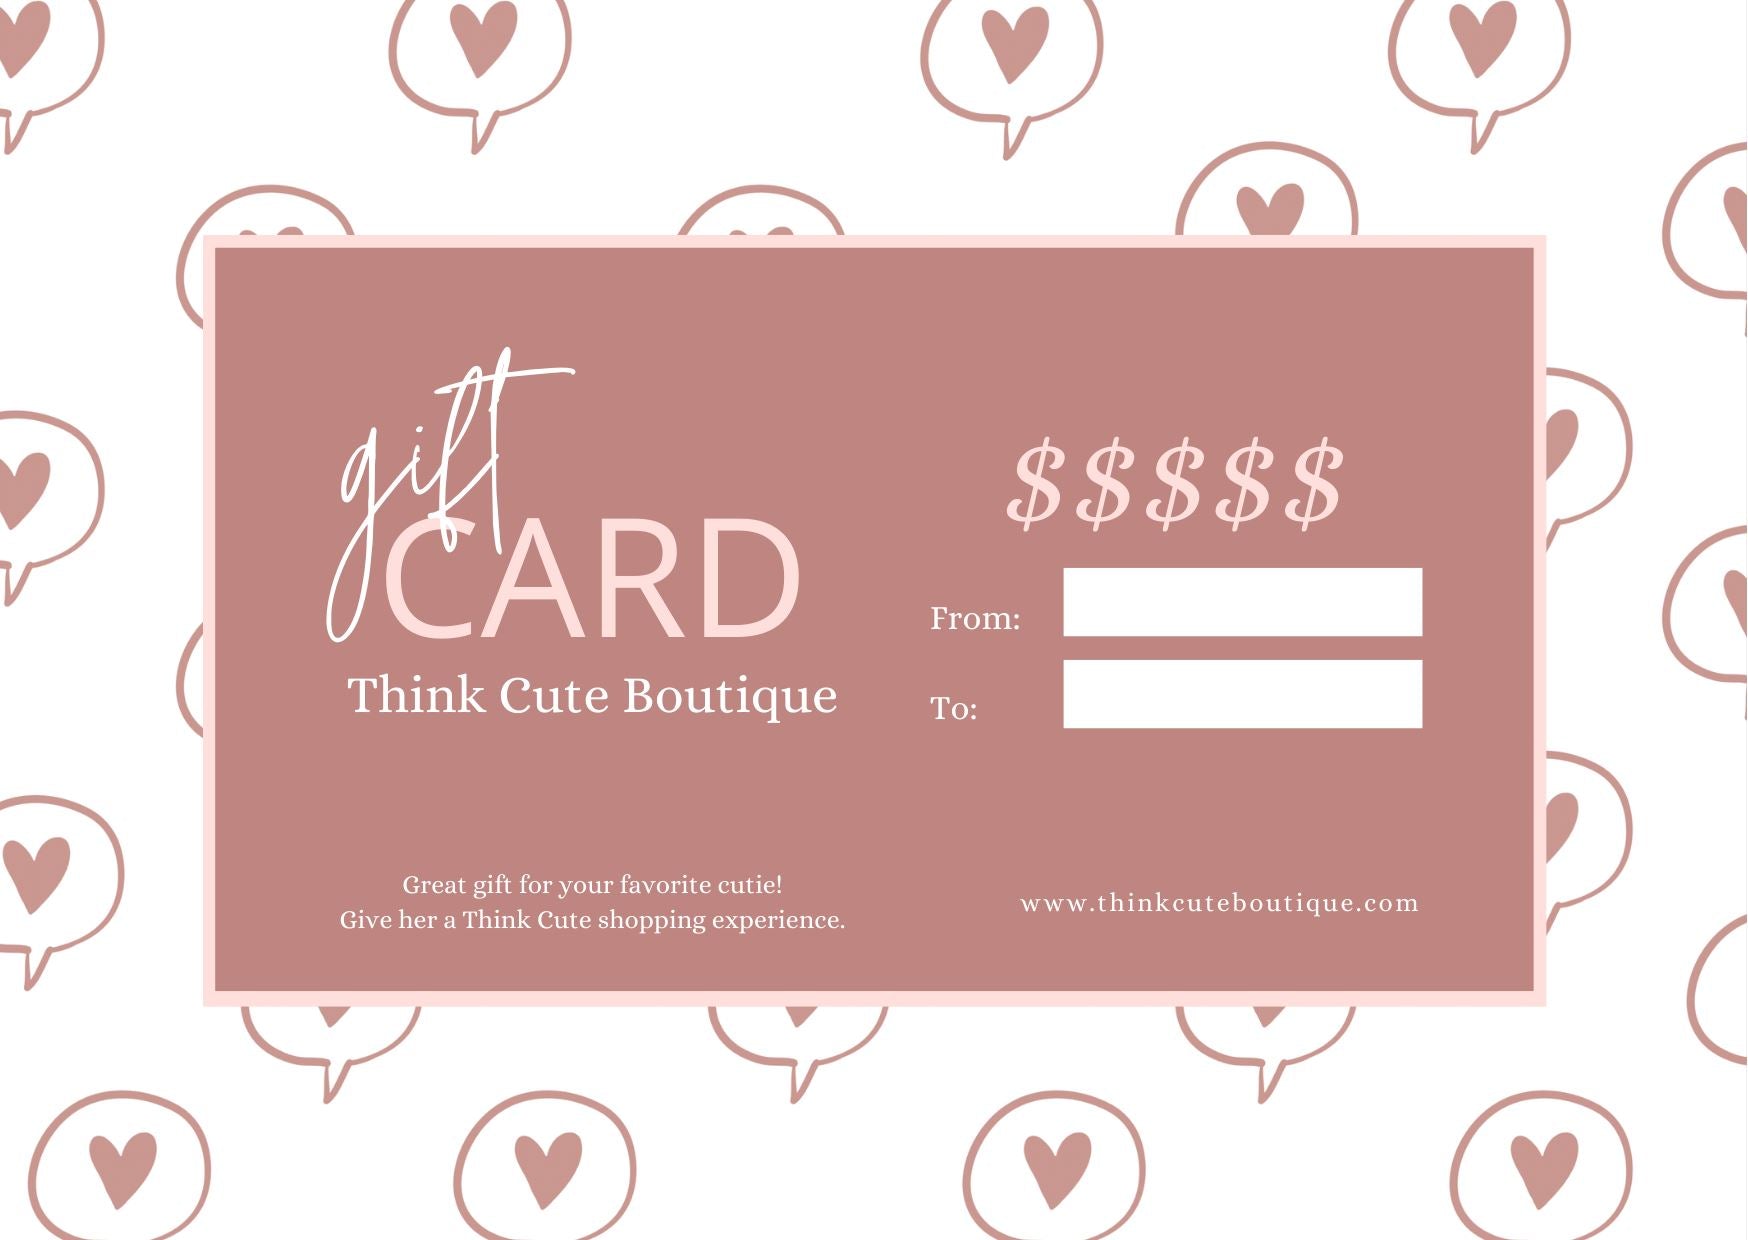 Think Cute Boutique Gift Card Gift Cards Think Cute Boutique $25.00 